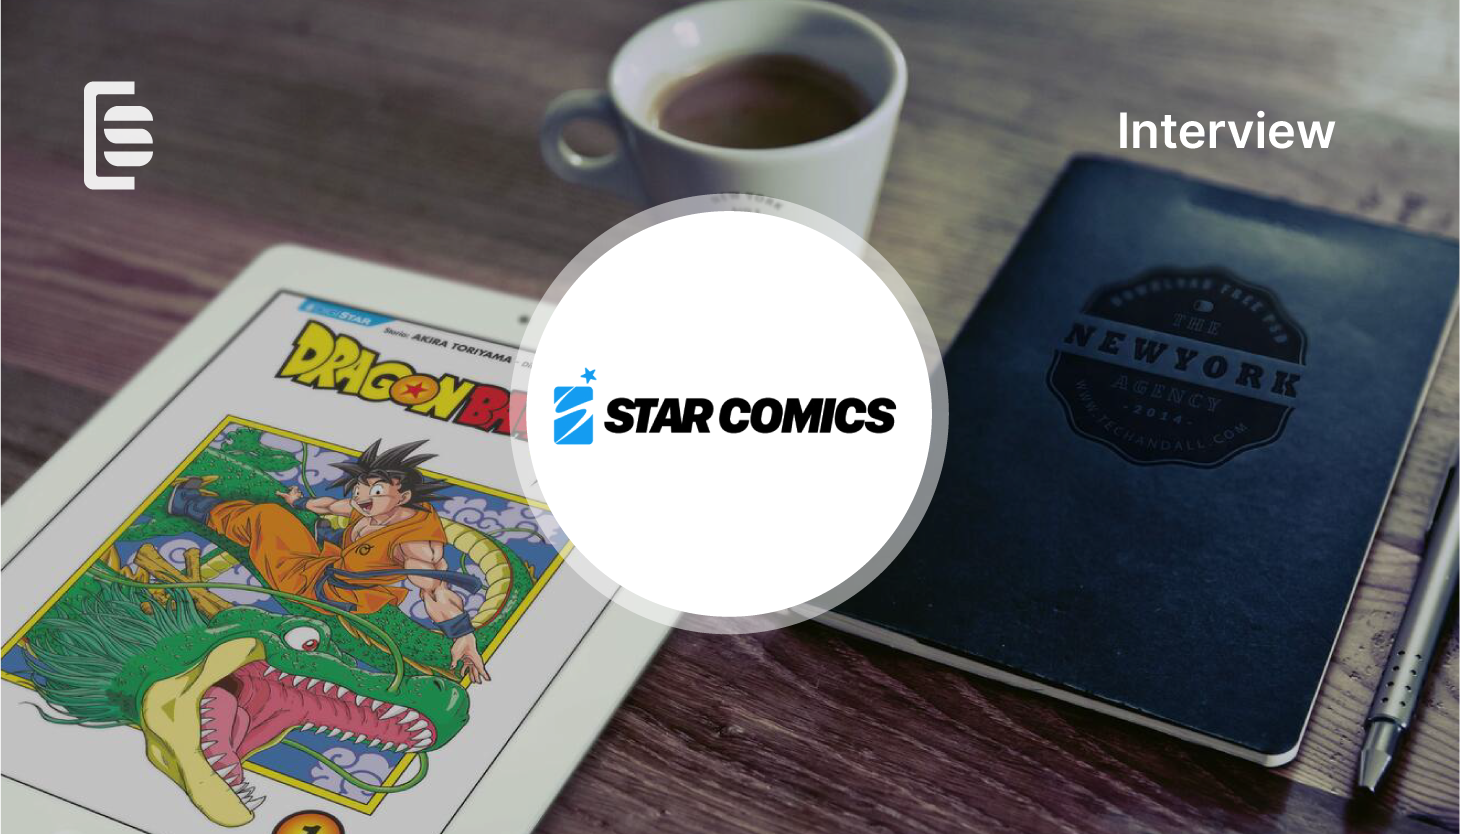 The interviews - Star Comics and the digital bet (won on two fronts!)